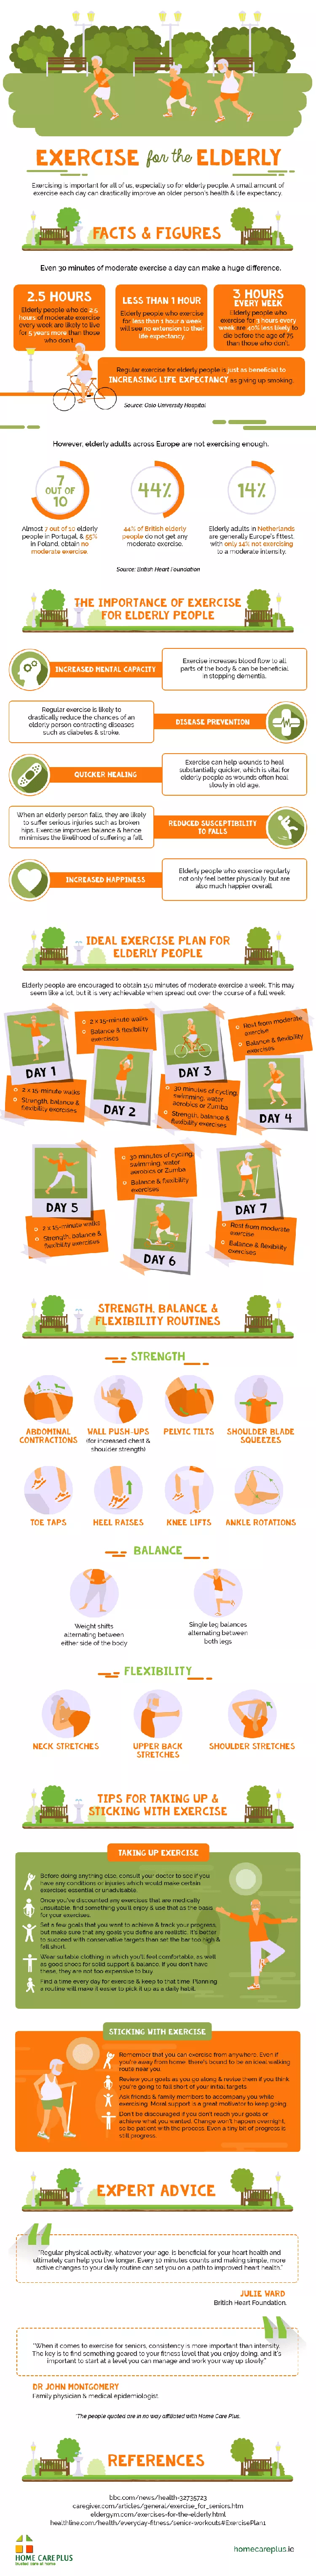 2.5 hours of exercise a week can add 5 years to an older person’s life [Visual asset]